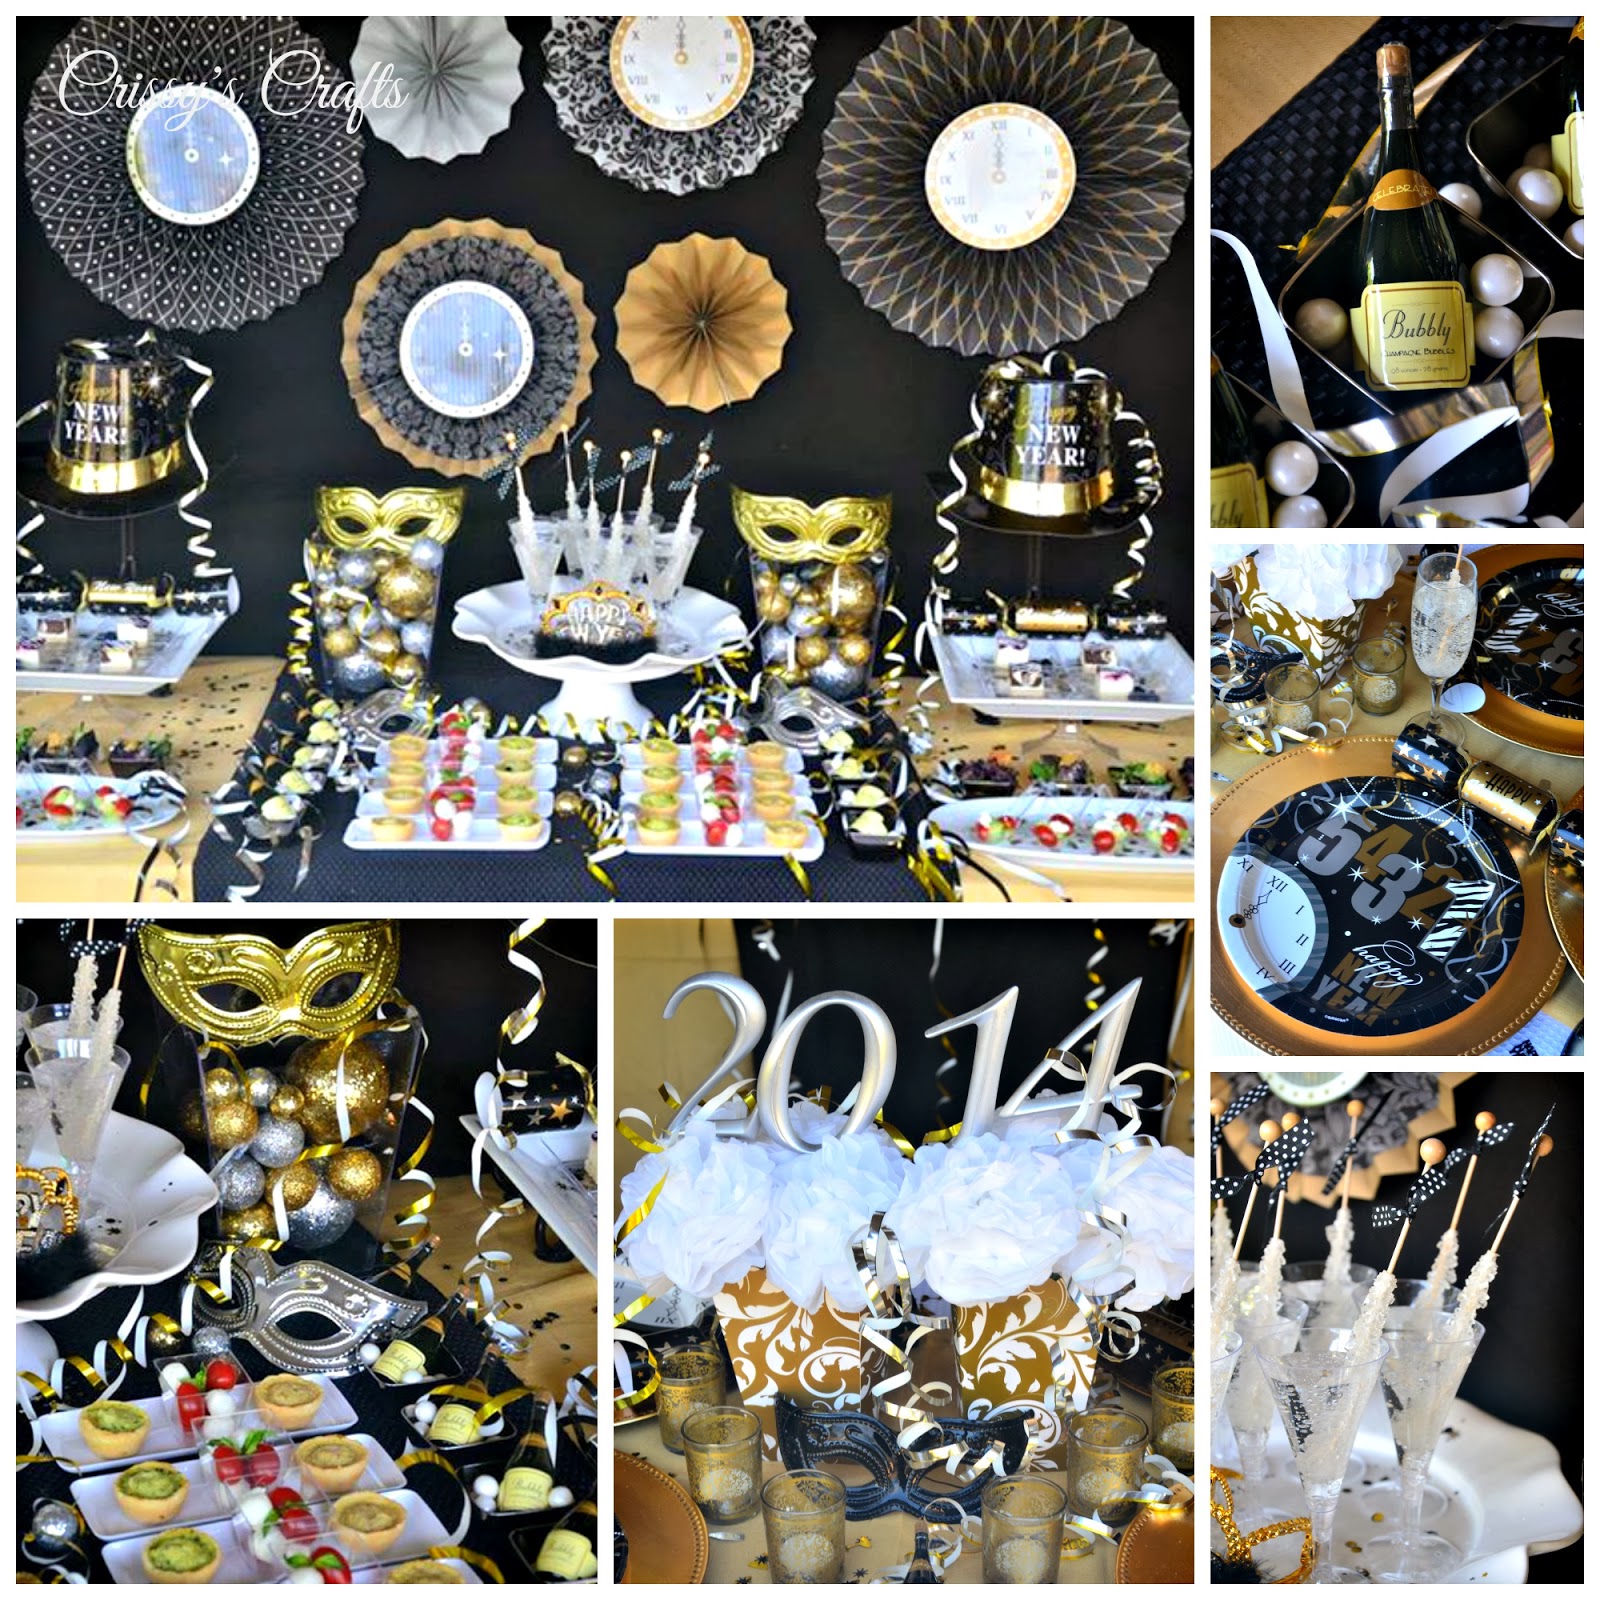 Crissy's Crafts New Years Eve Party Ideas